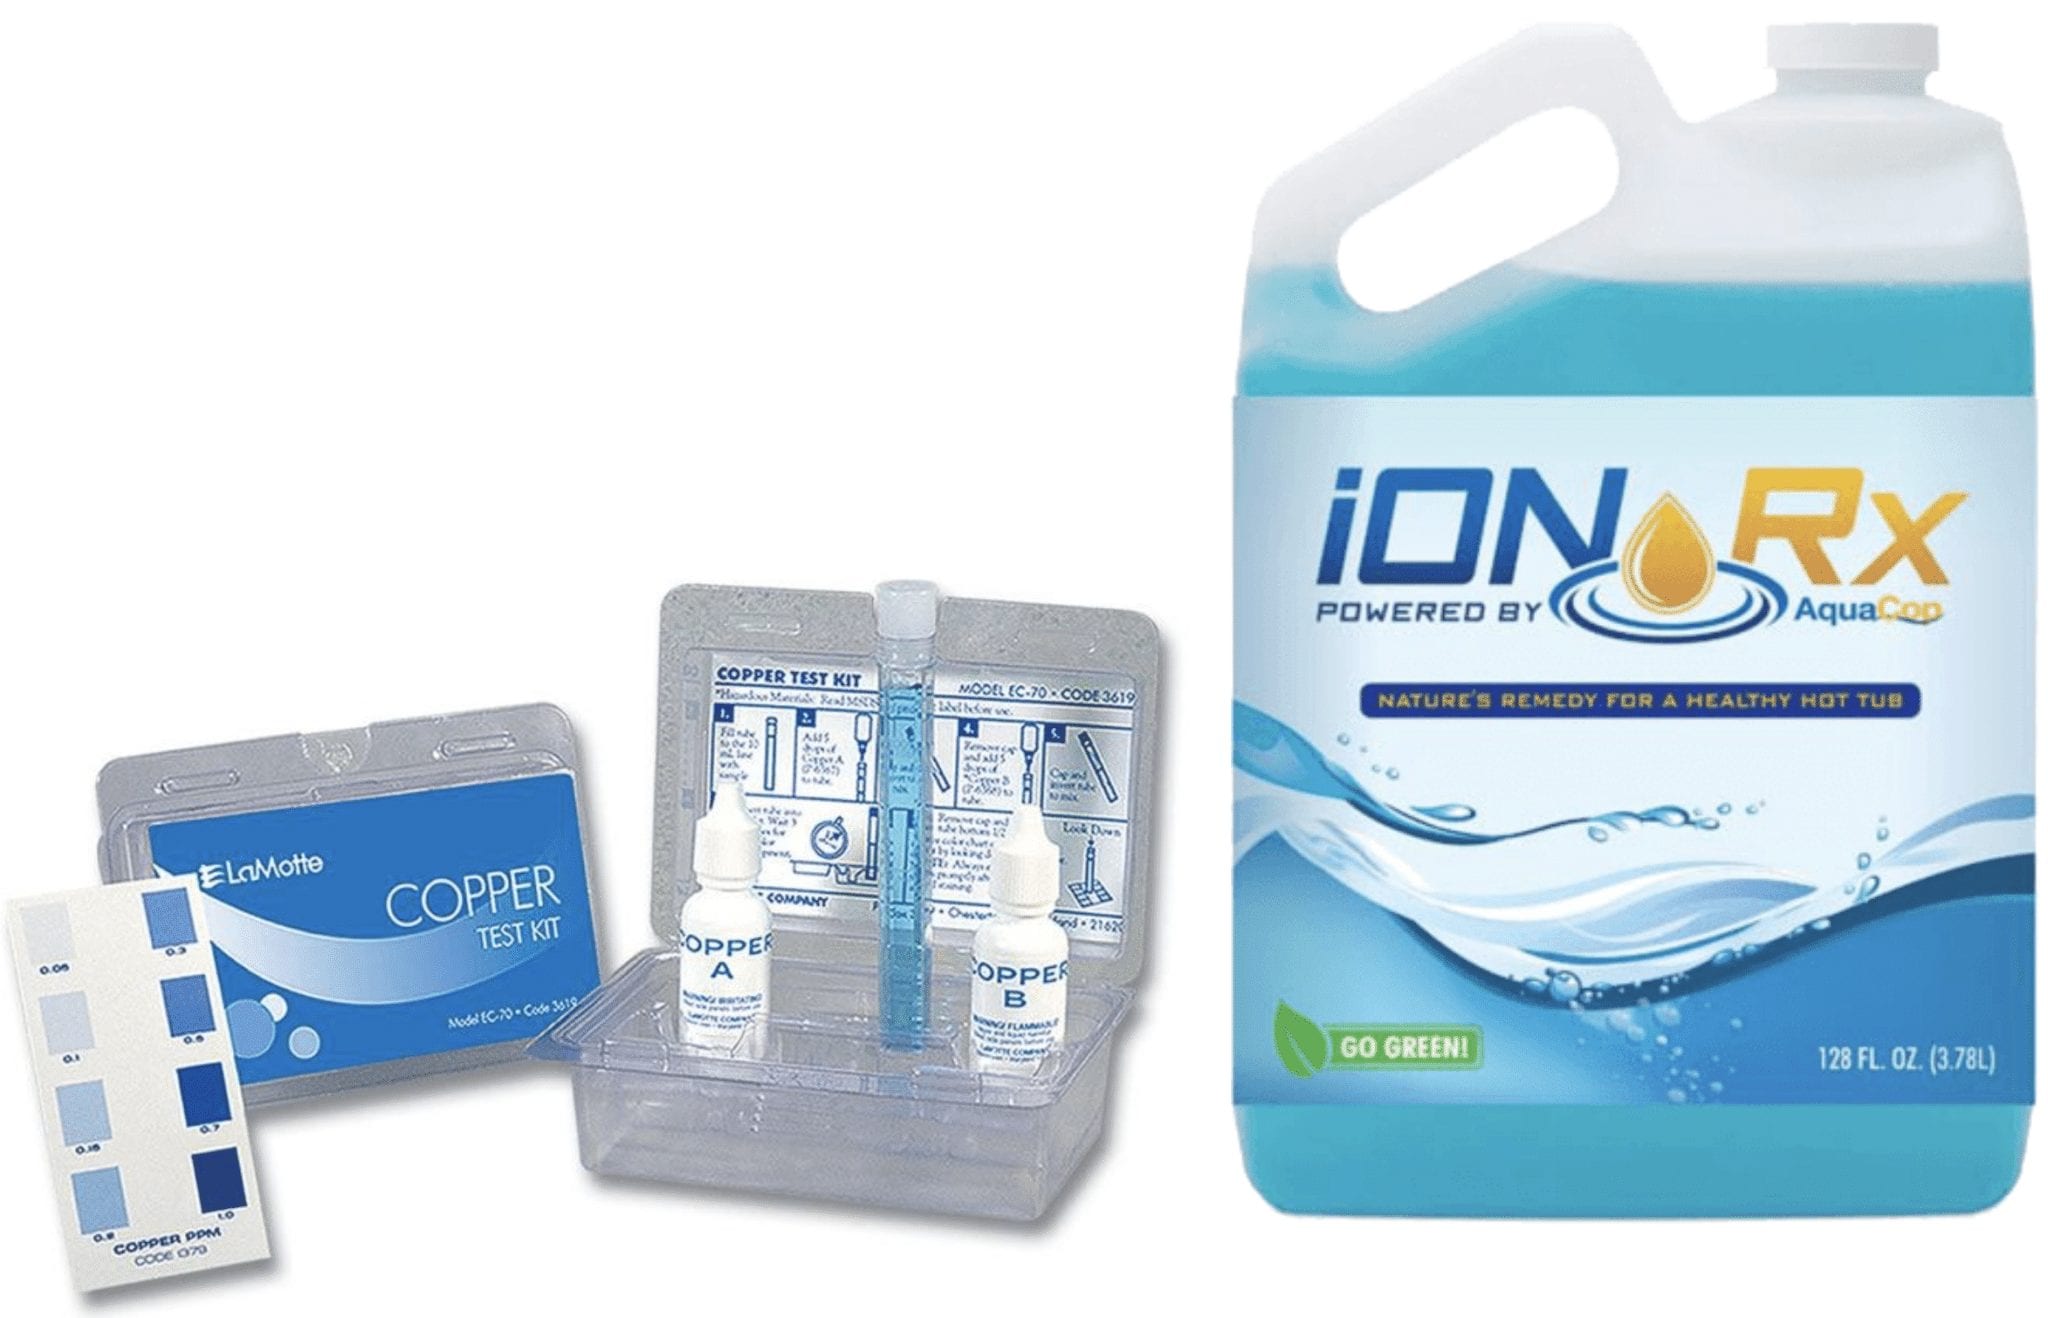 ionrx solution and copper test kit